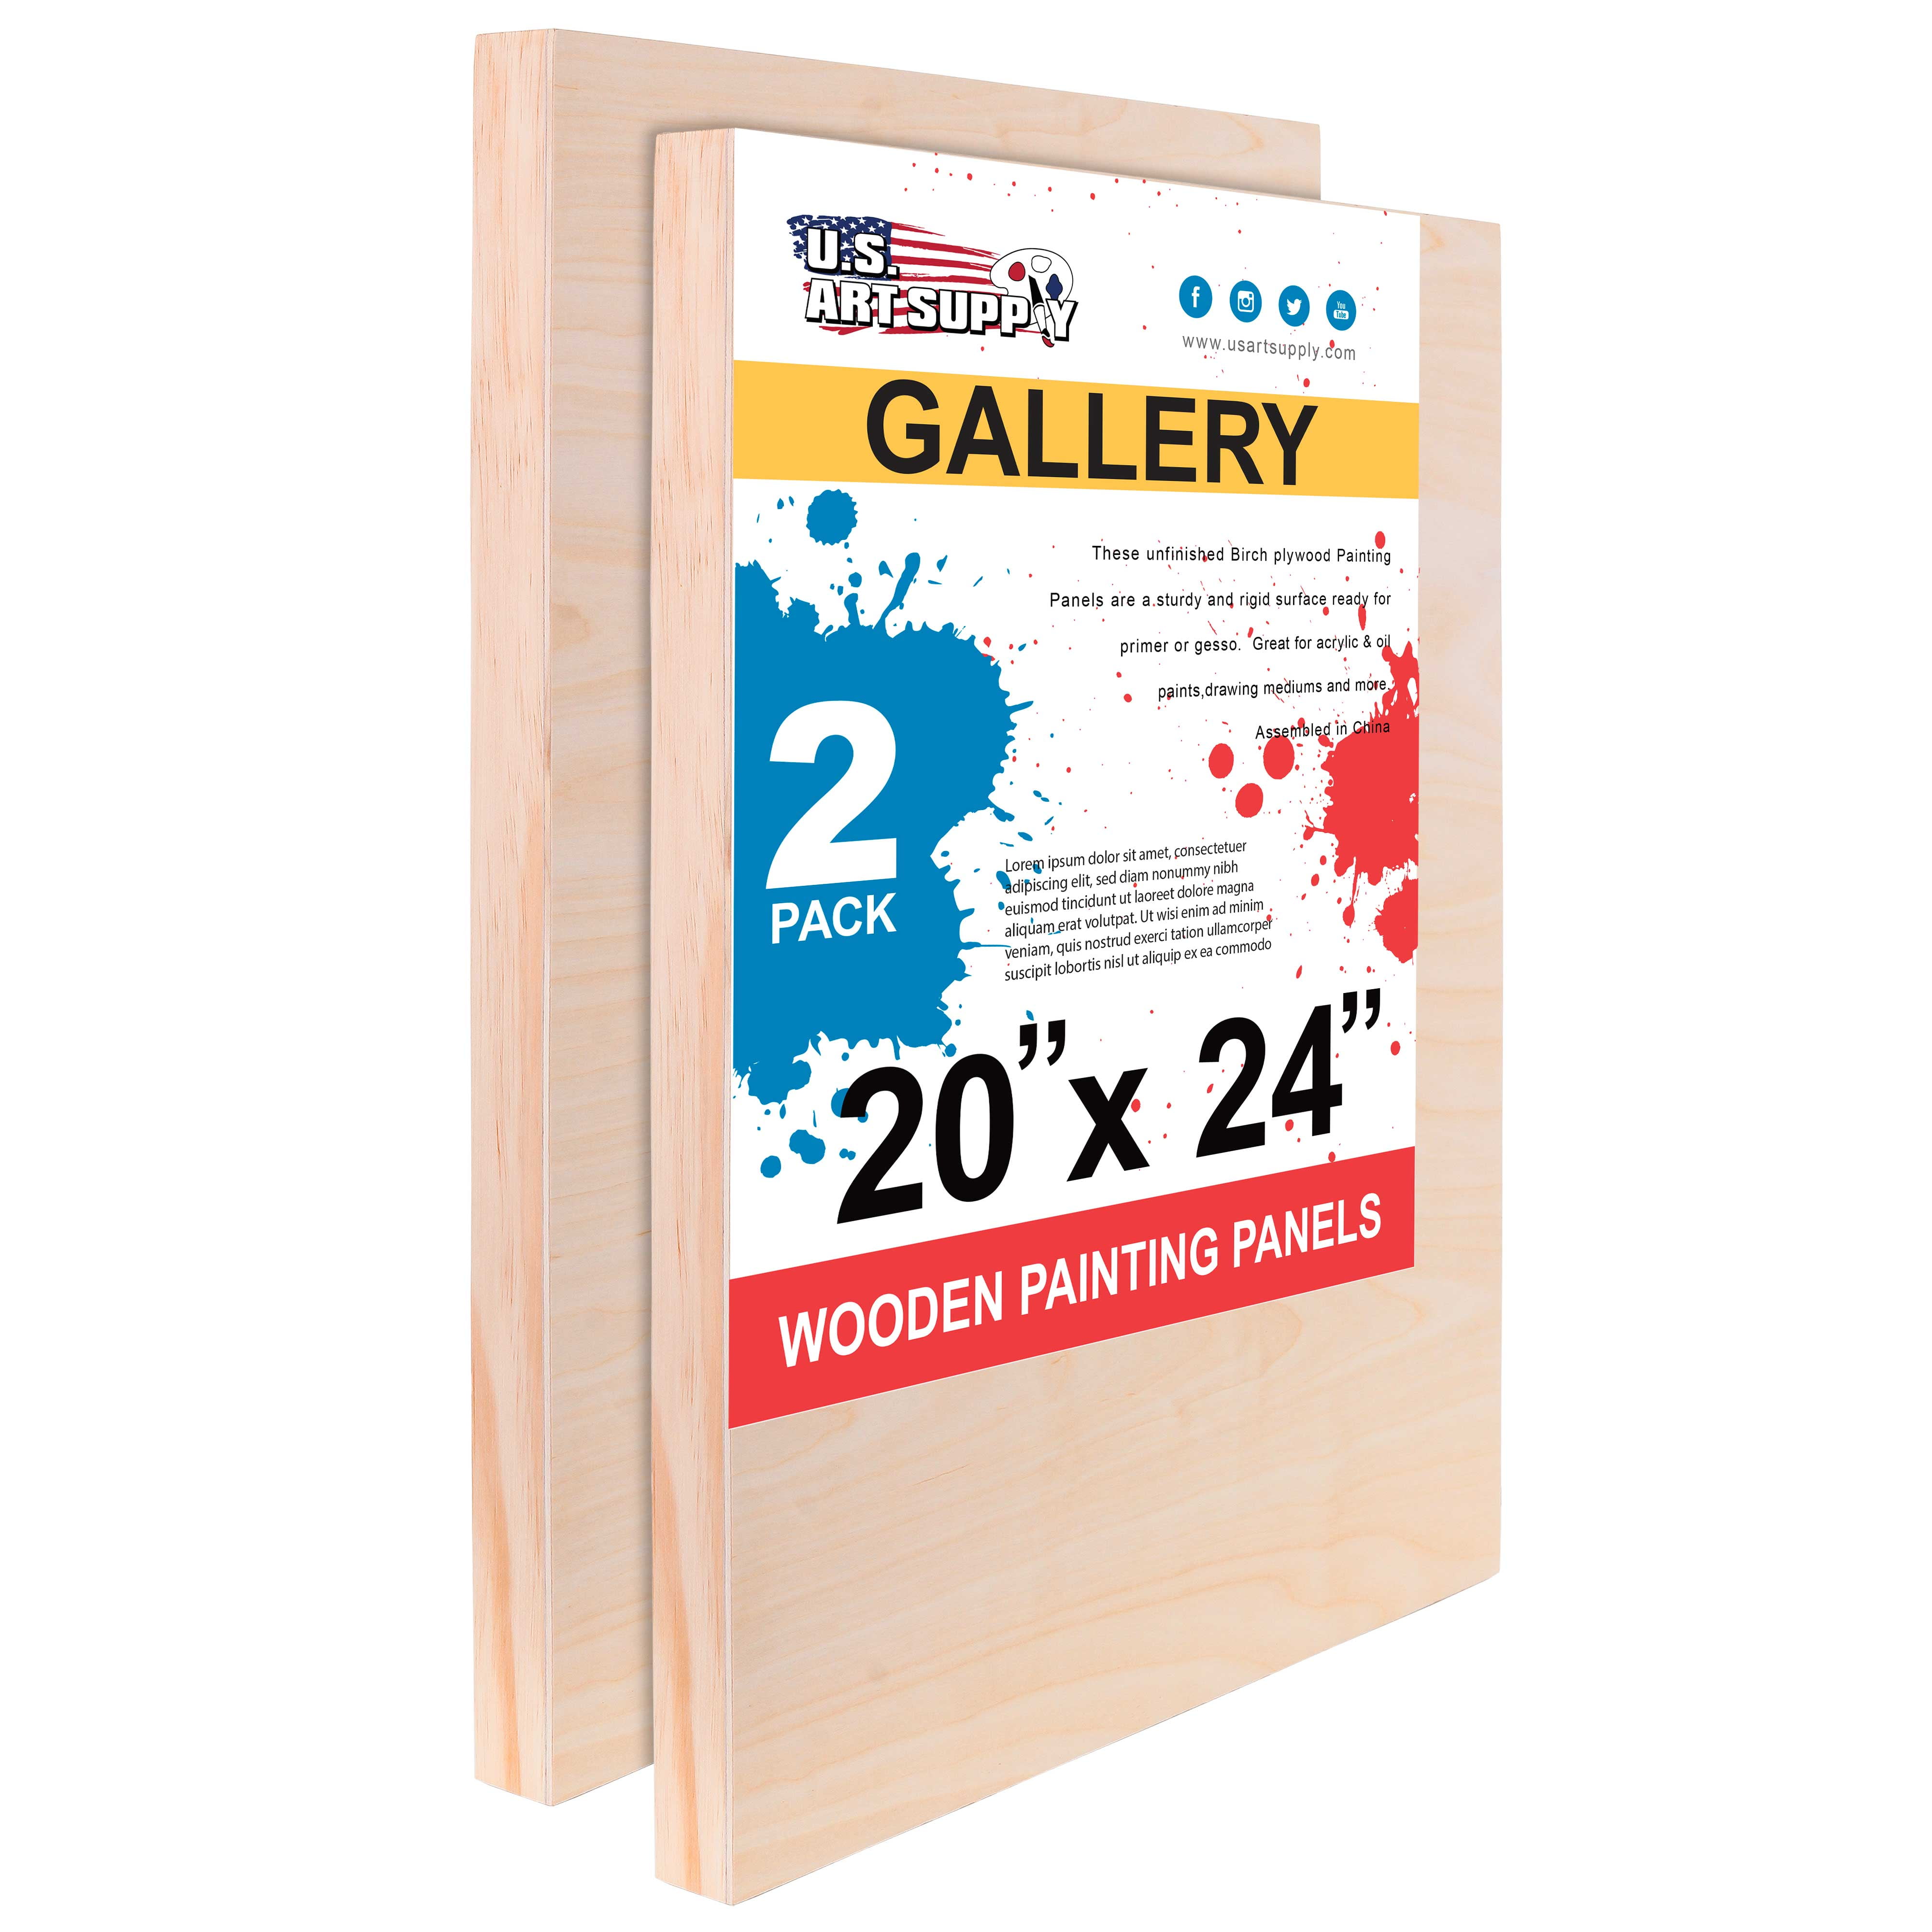 Gallery 1-1/2 Deep Cradle Art Supply 20 x 24 Birch Wood Paint Pouring Panel Boards - Artist Depth Wooden Wall Canvases Oil Encaustic Pack of 2 Painting Mixed-Media Craft Acrylic U.S 